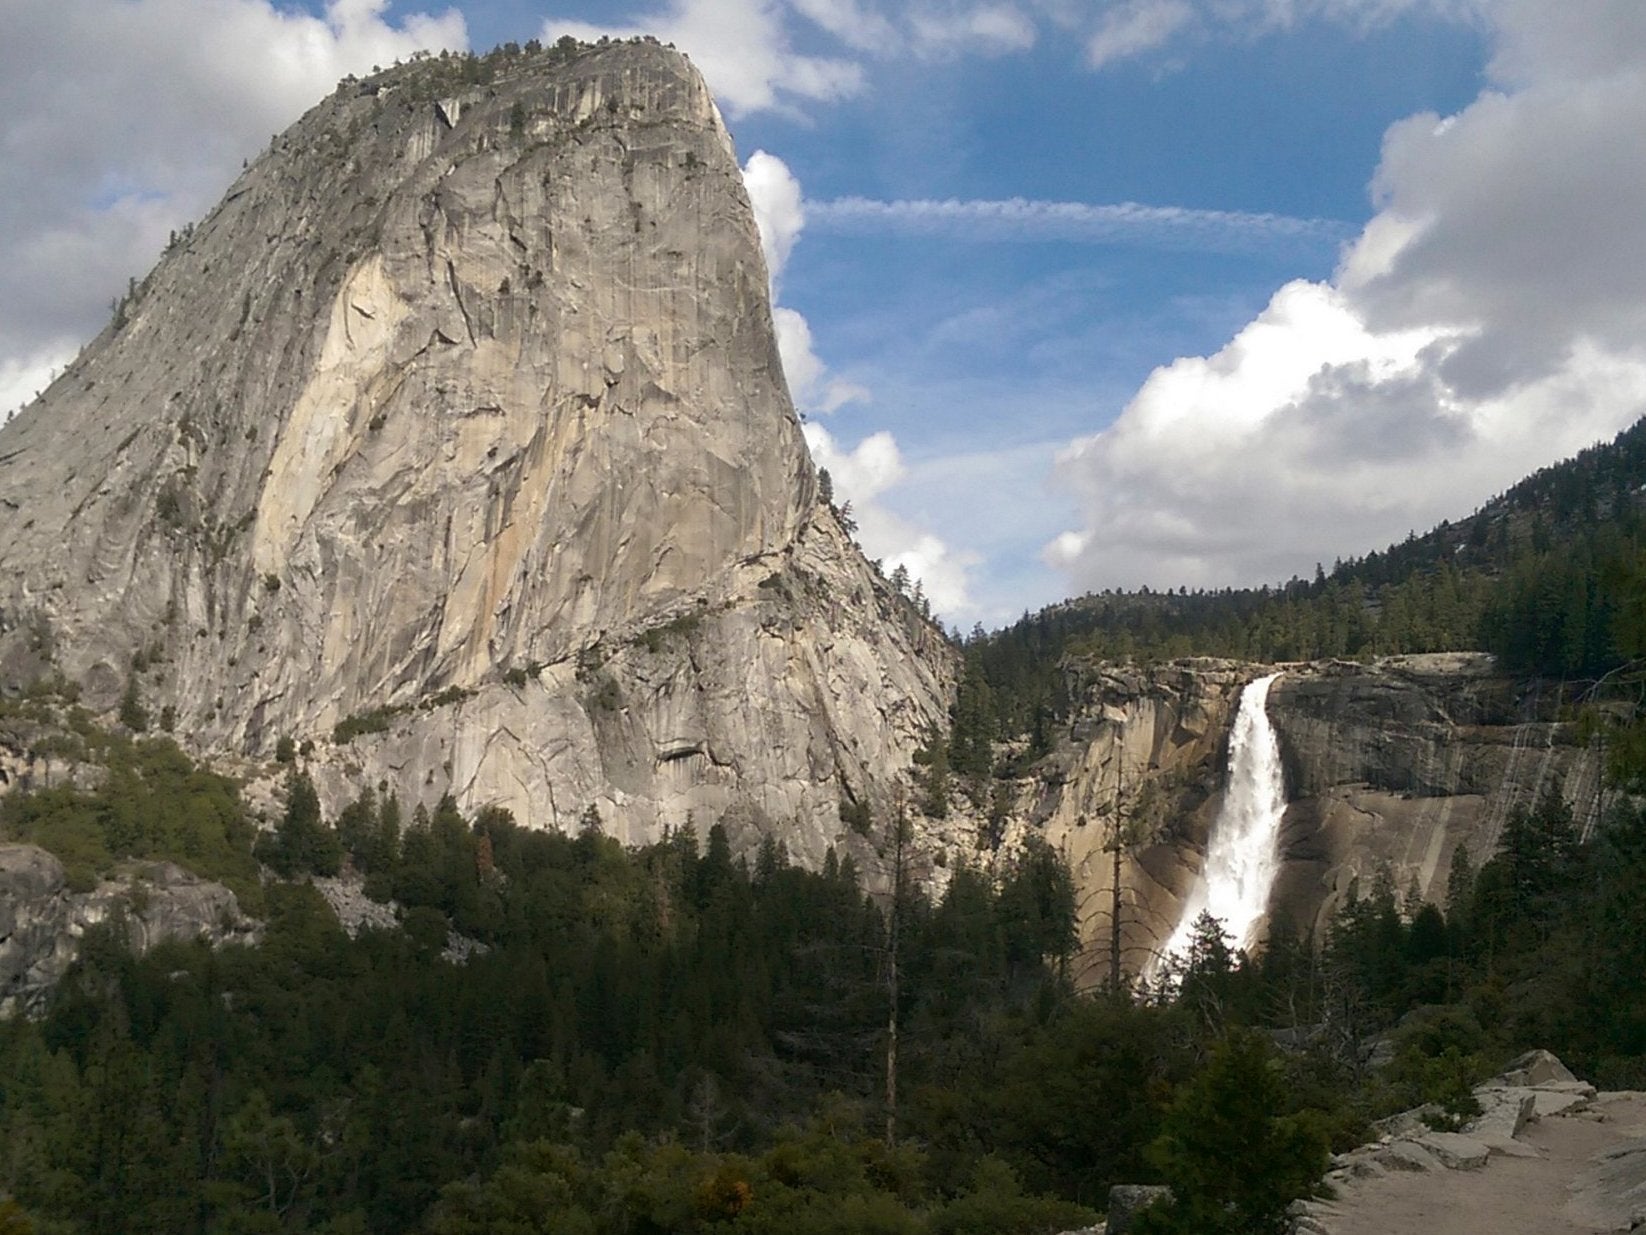 Nevada Fall in the Yosemite National Park is around 600ft tall